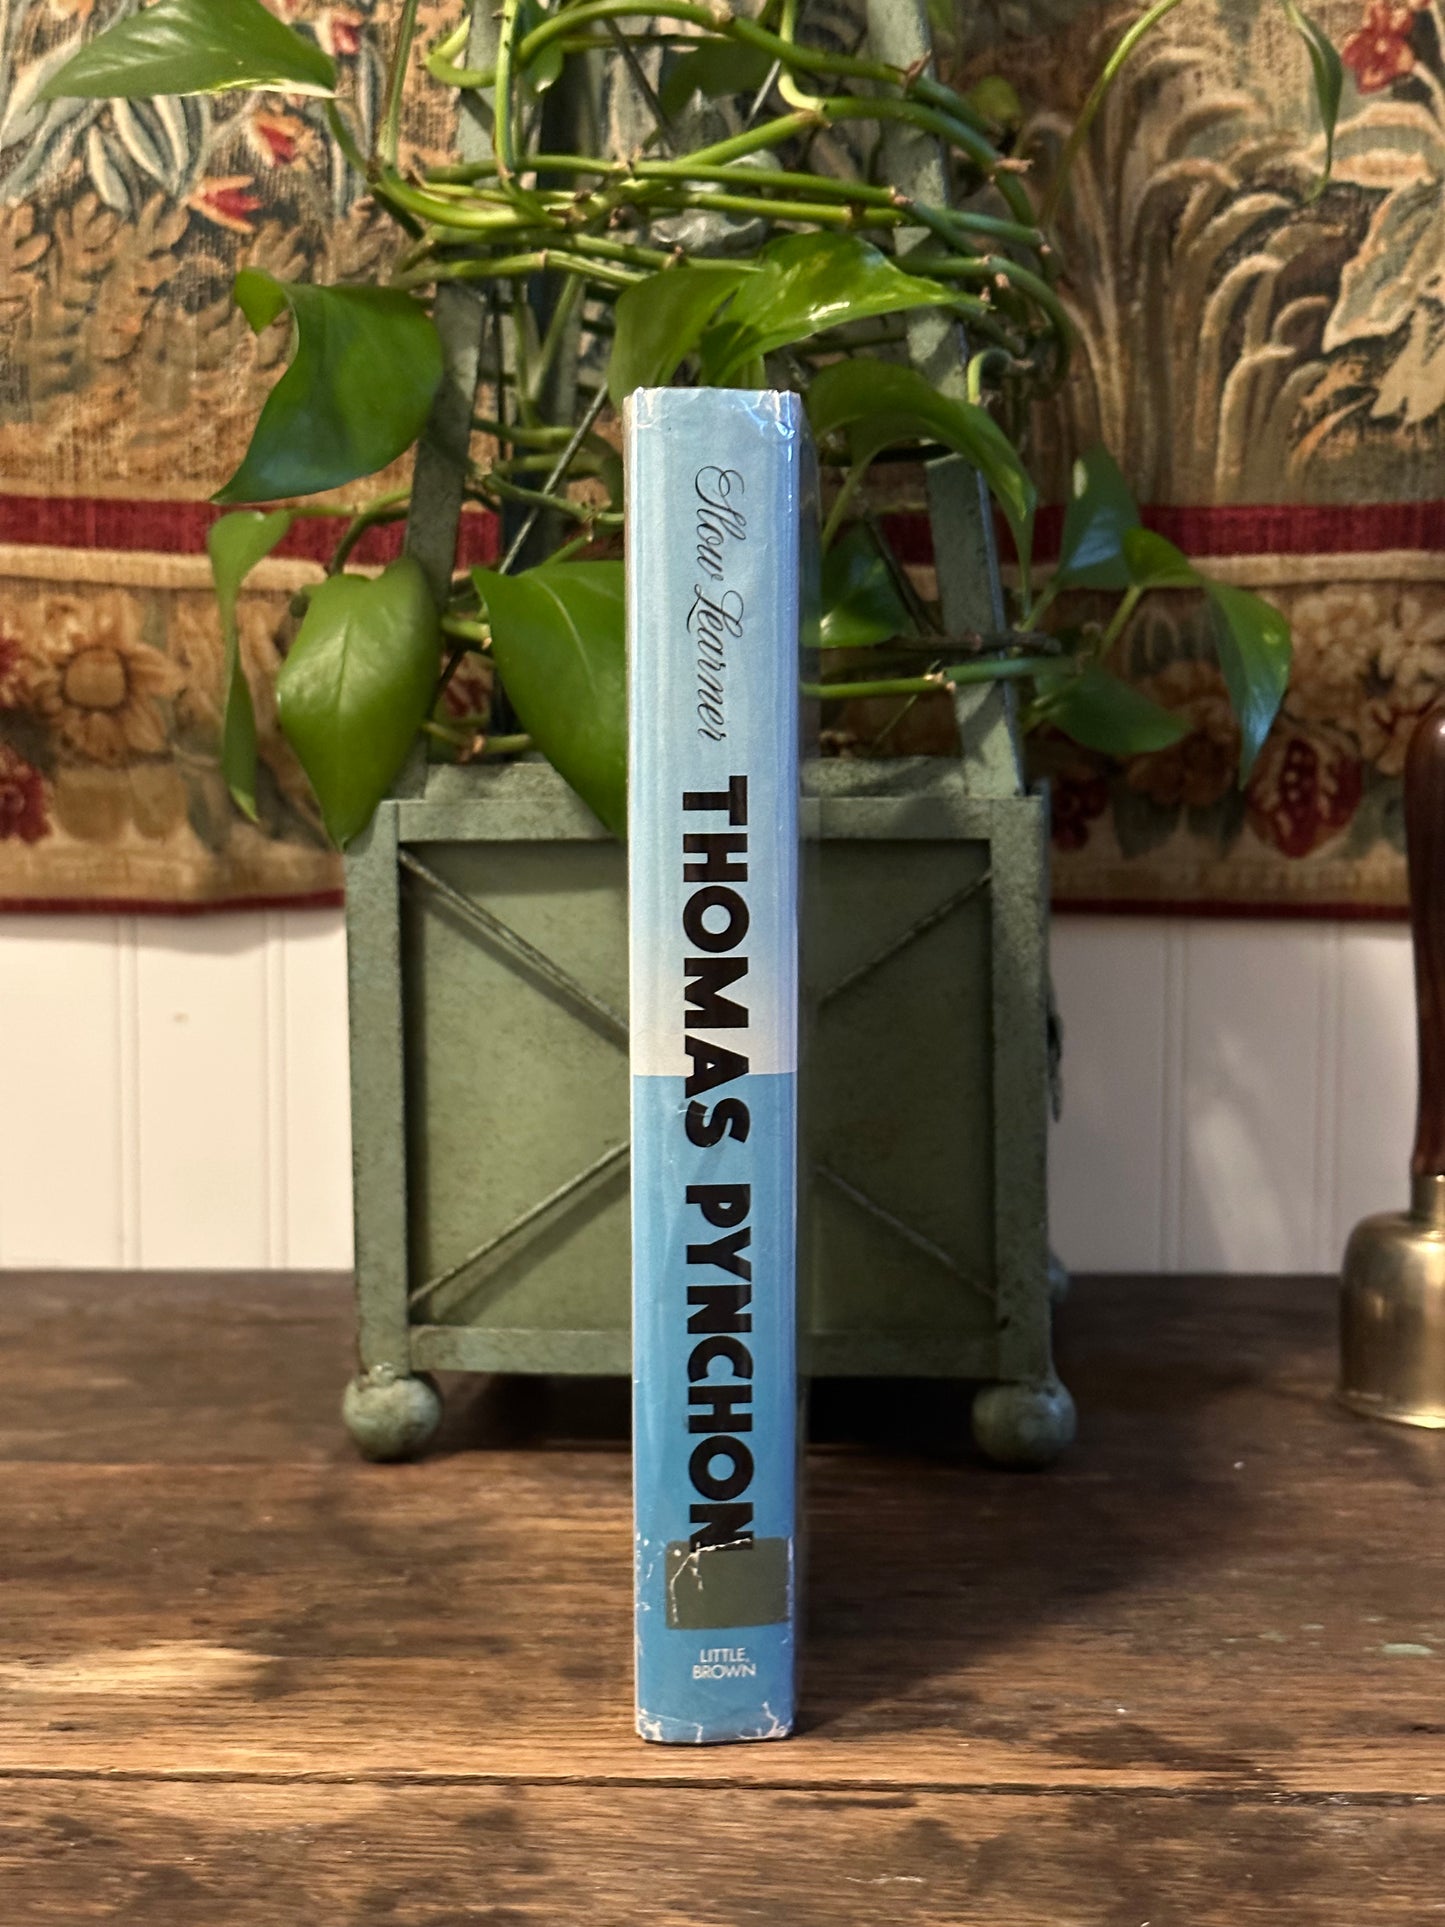 Slow Learner by Thomas Pynchon (First Edition)